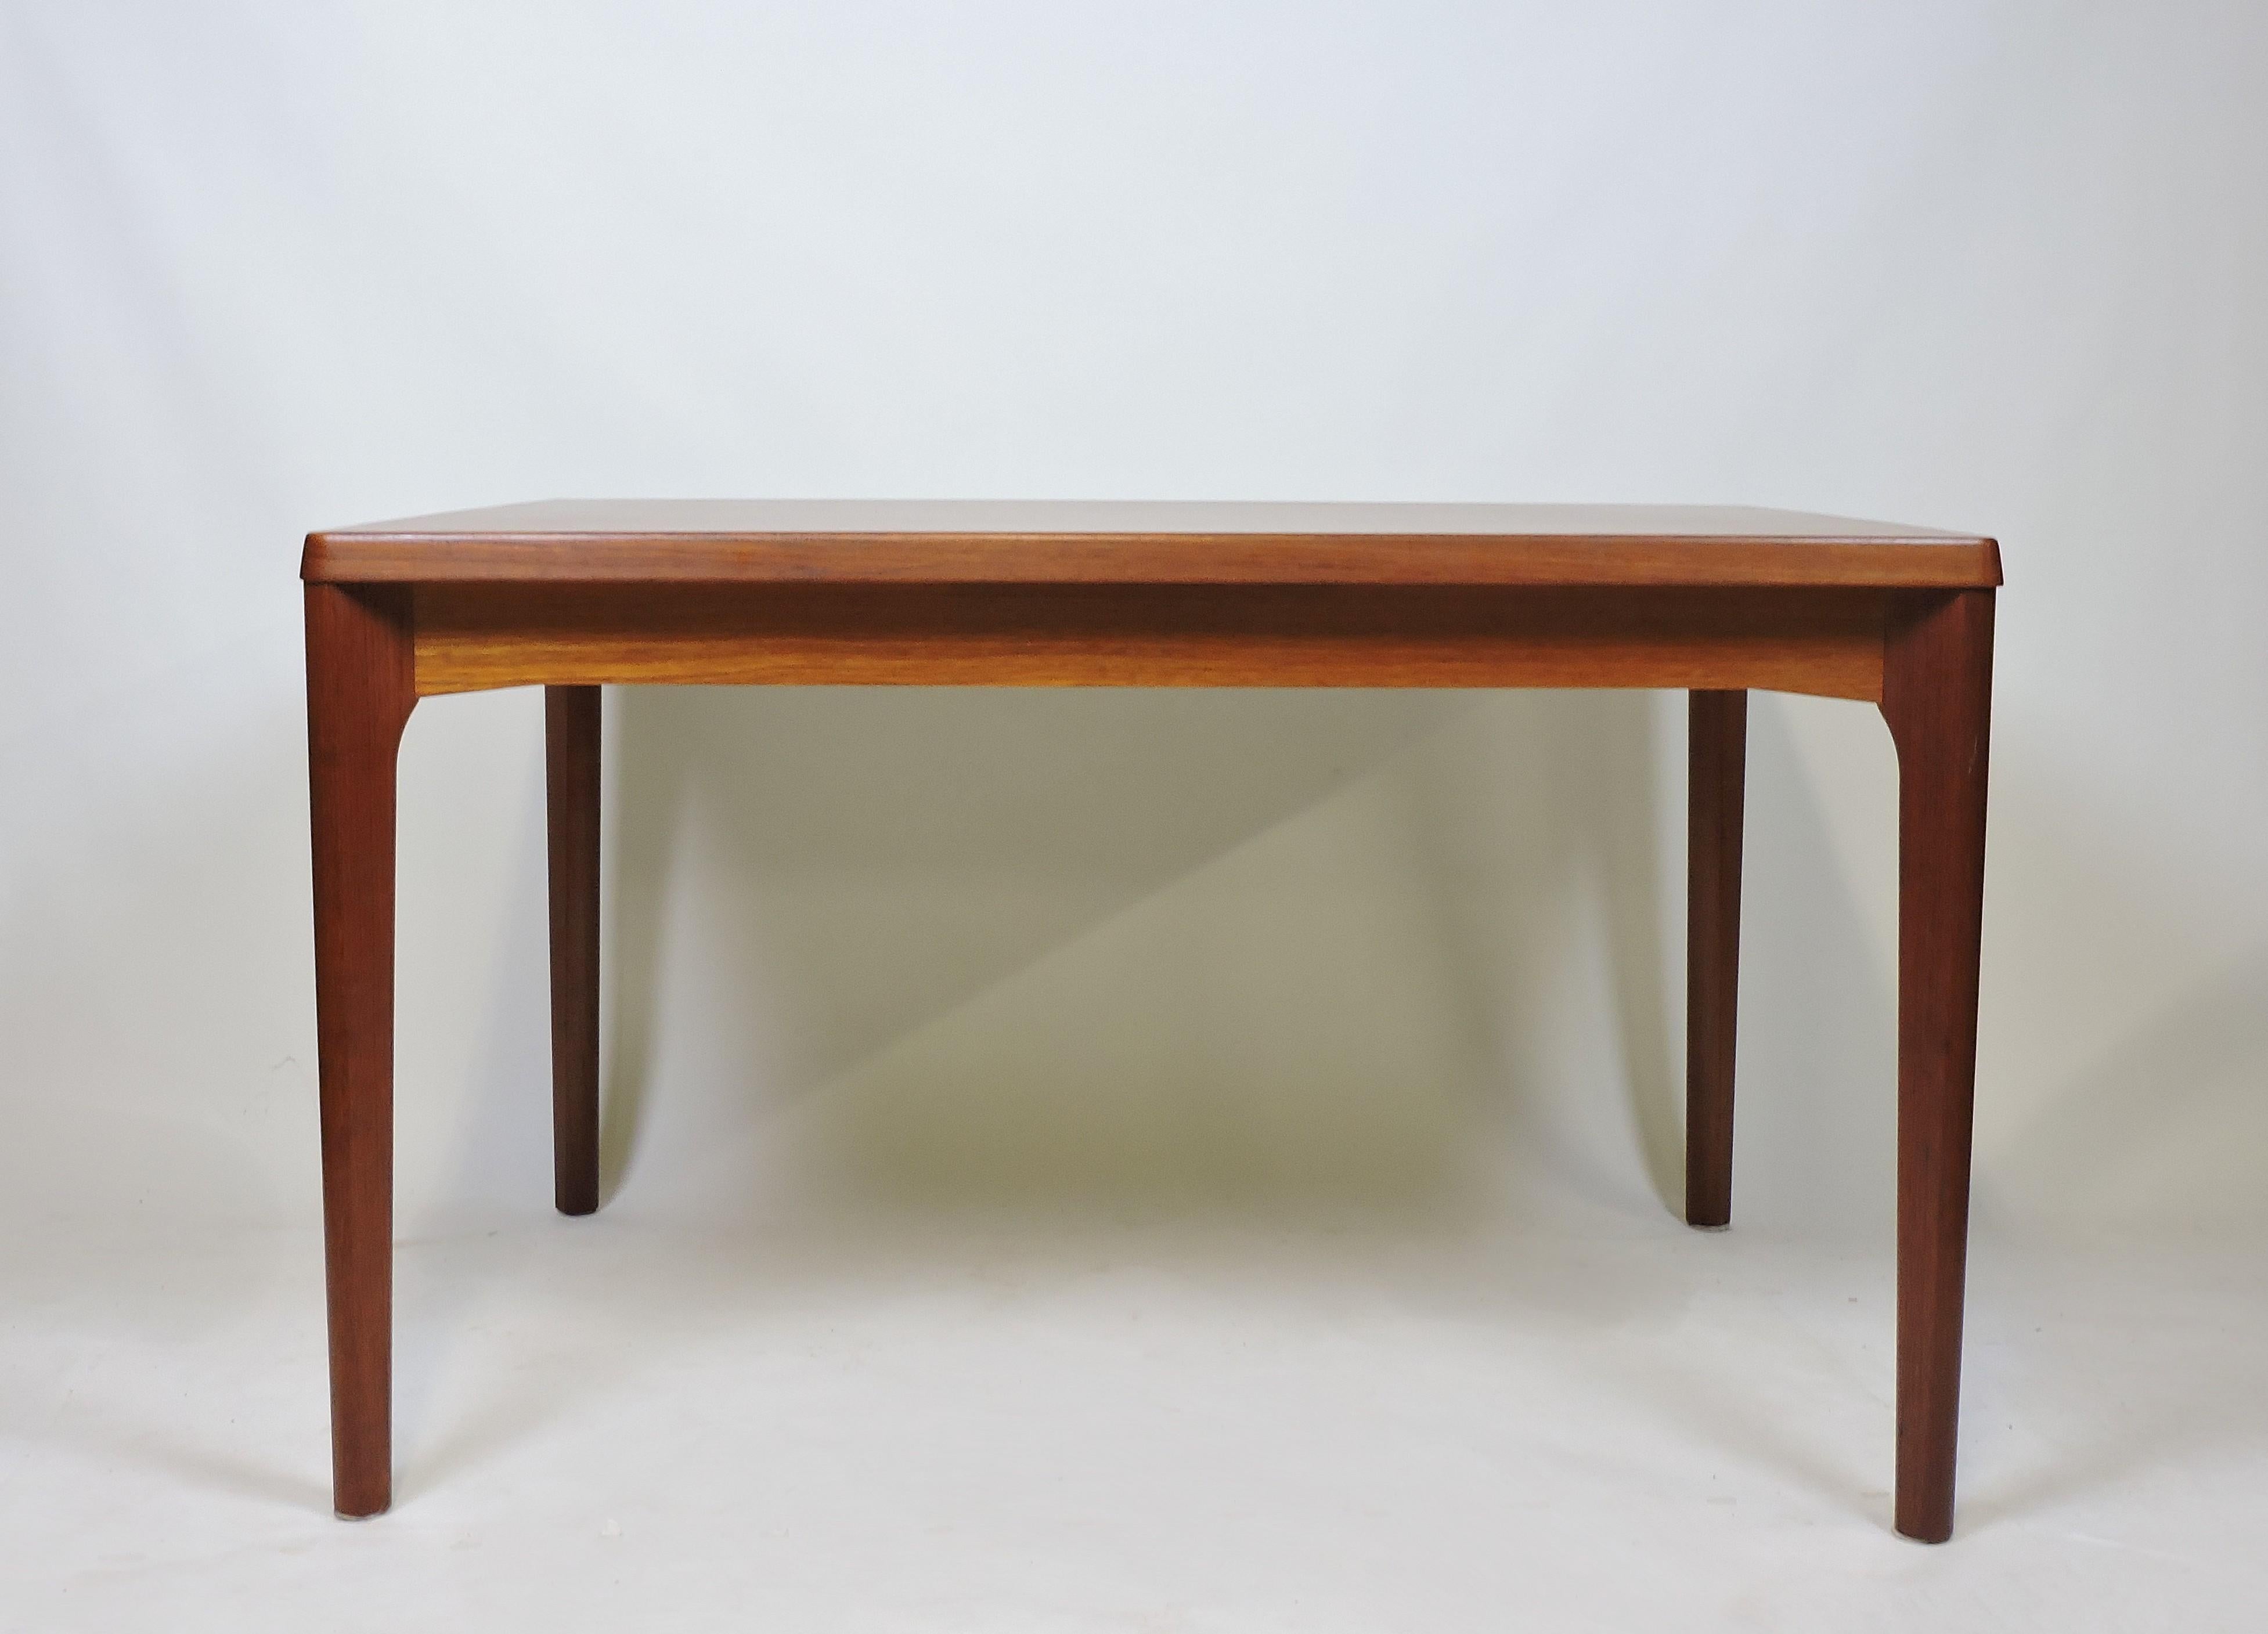 Simple and elegant dining table designed by Henning Kjaernulf and manufactured in Denmark by Vejle Stole. This table has sculpted solid teak legs and two hidden leaves that can extend the table to 82 1/2 inches. Stamped underneath.
 